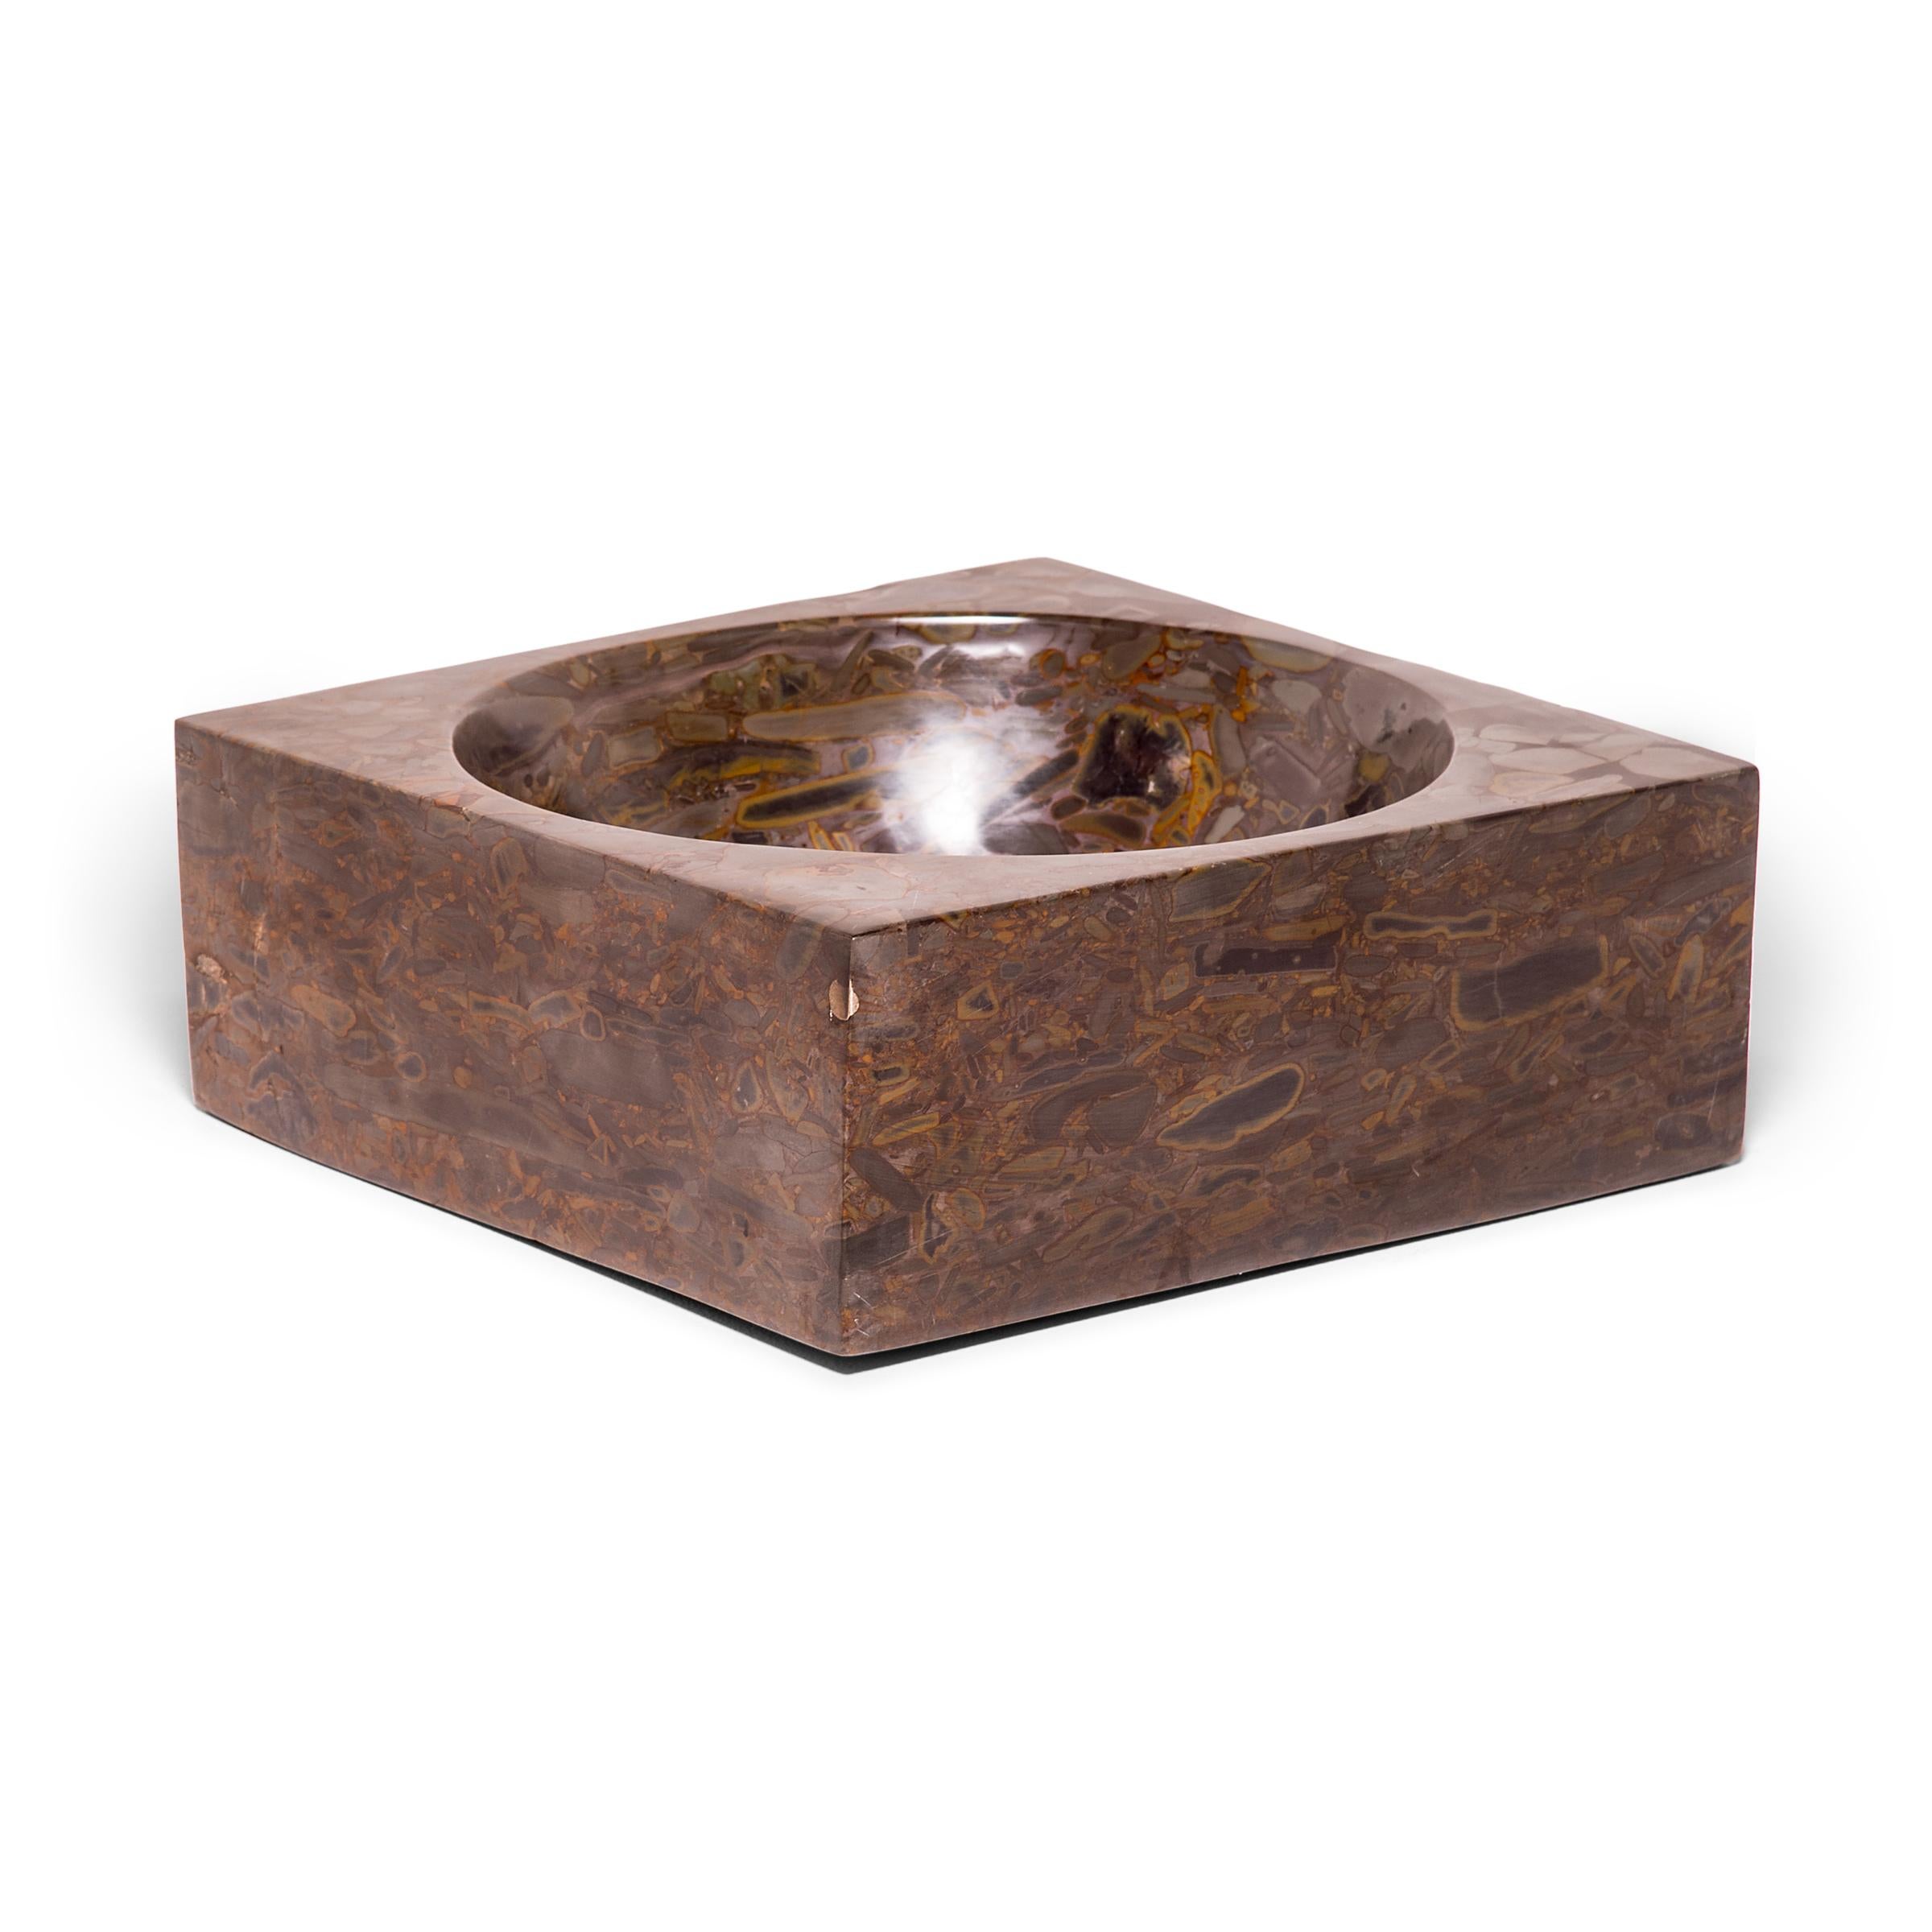 A clean-lined interpretation of an ancient form, this squared basin was hand-carved by artisans in China's Shandong province. The rounded interior and finely edged exterior offer an eye-catching combination of forms. The basin looks meticulously